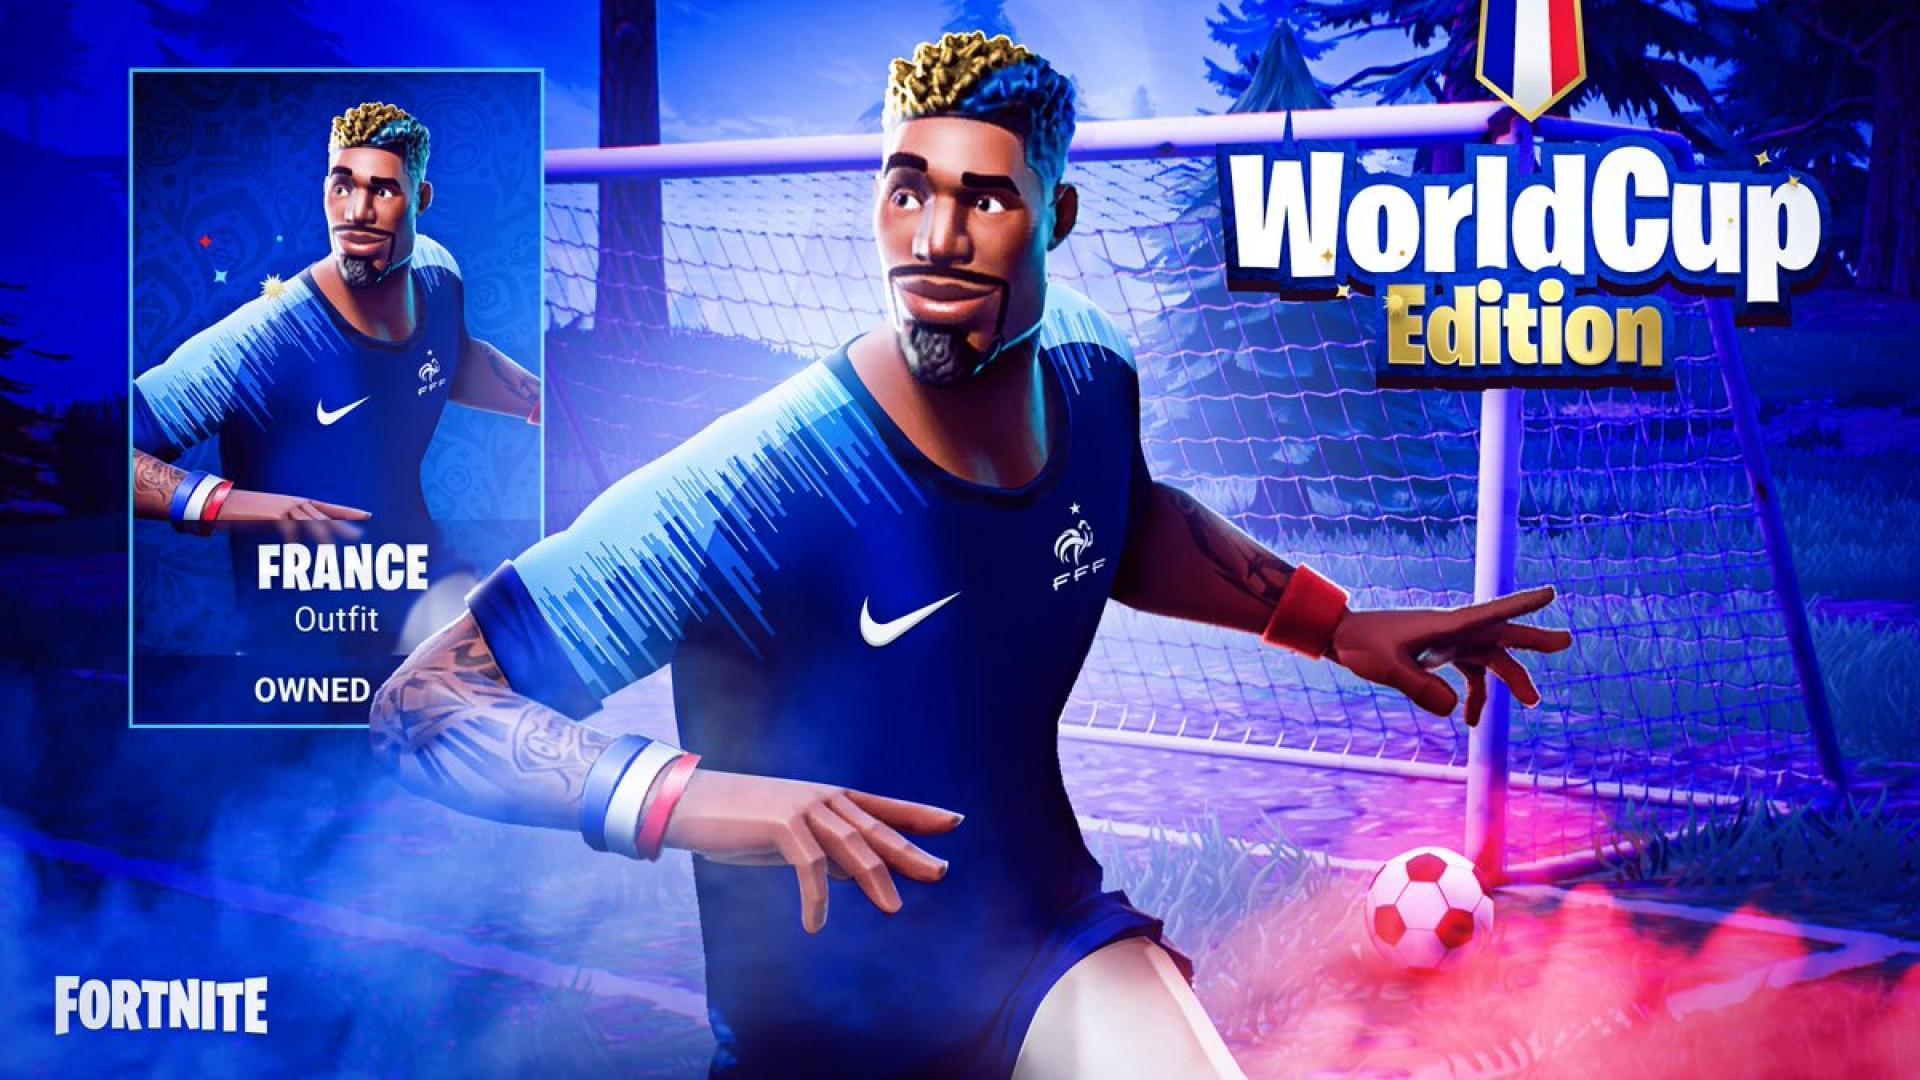 Football Fortnite Skins Wallpaper For iPhone, Android and Desktop